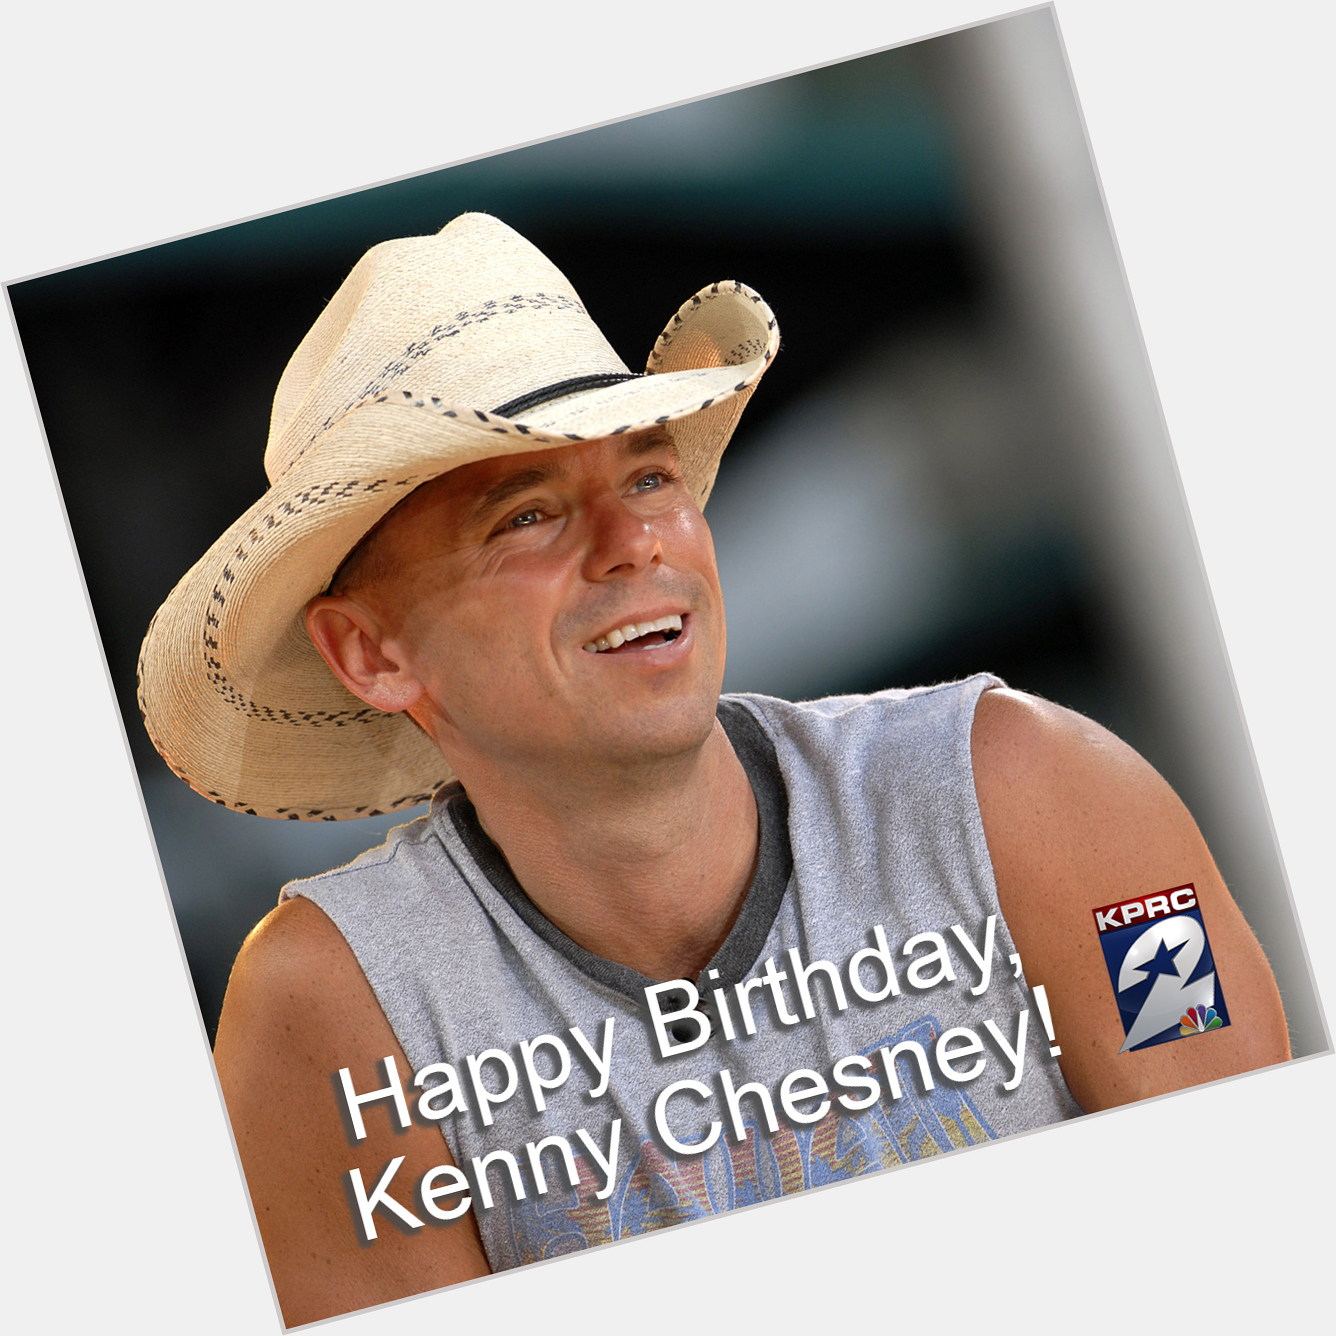 Happy Birthday, Kenny Chesney! The country music star is 53 years old today. 